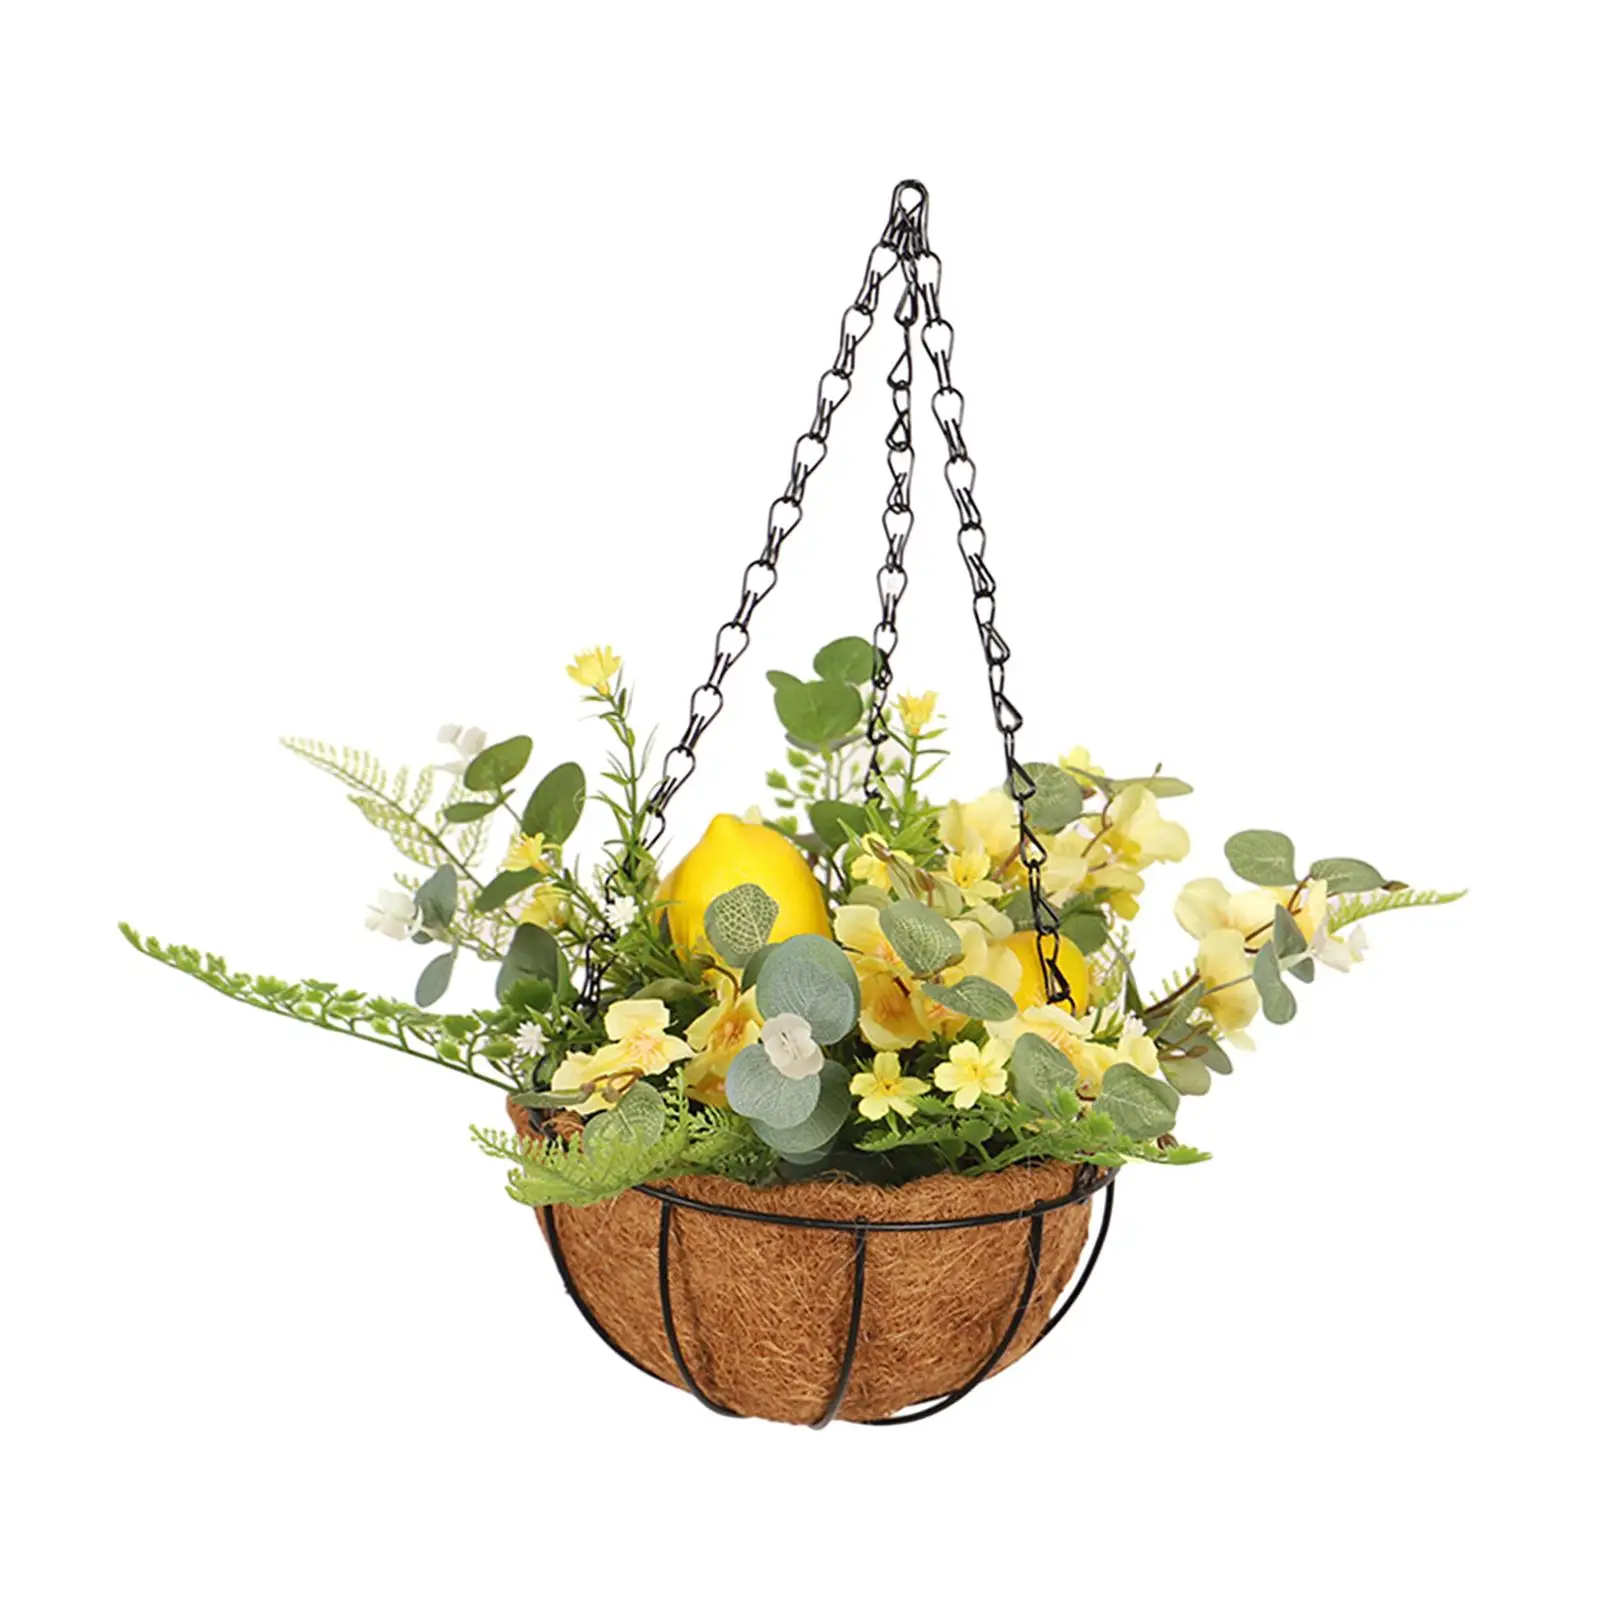 Hanging Artificial Flowers Basket Ornament Chain Flowerpot Fake Hanging Plant for Backyard Balcony Lawn Patio Outdoor Indoor